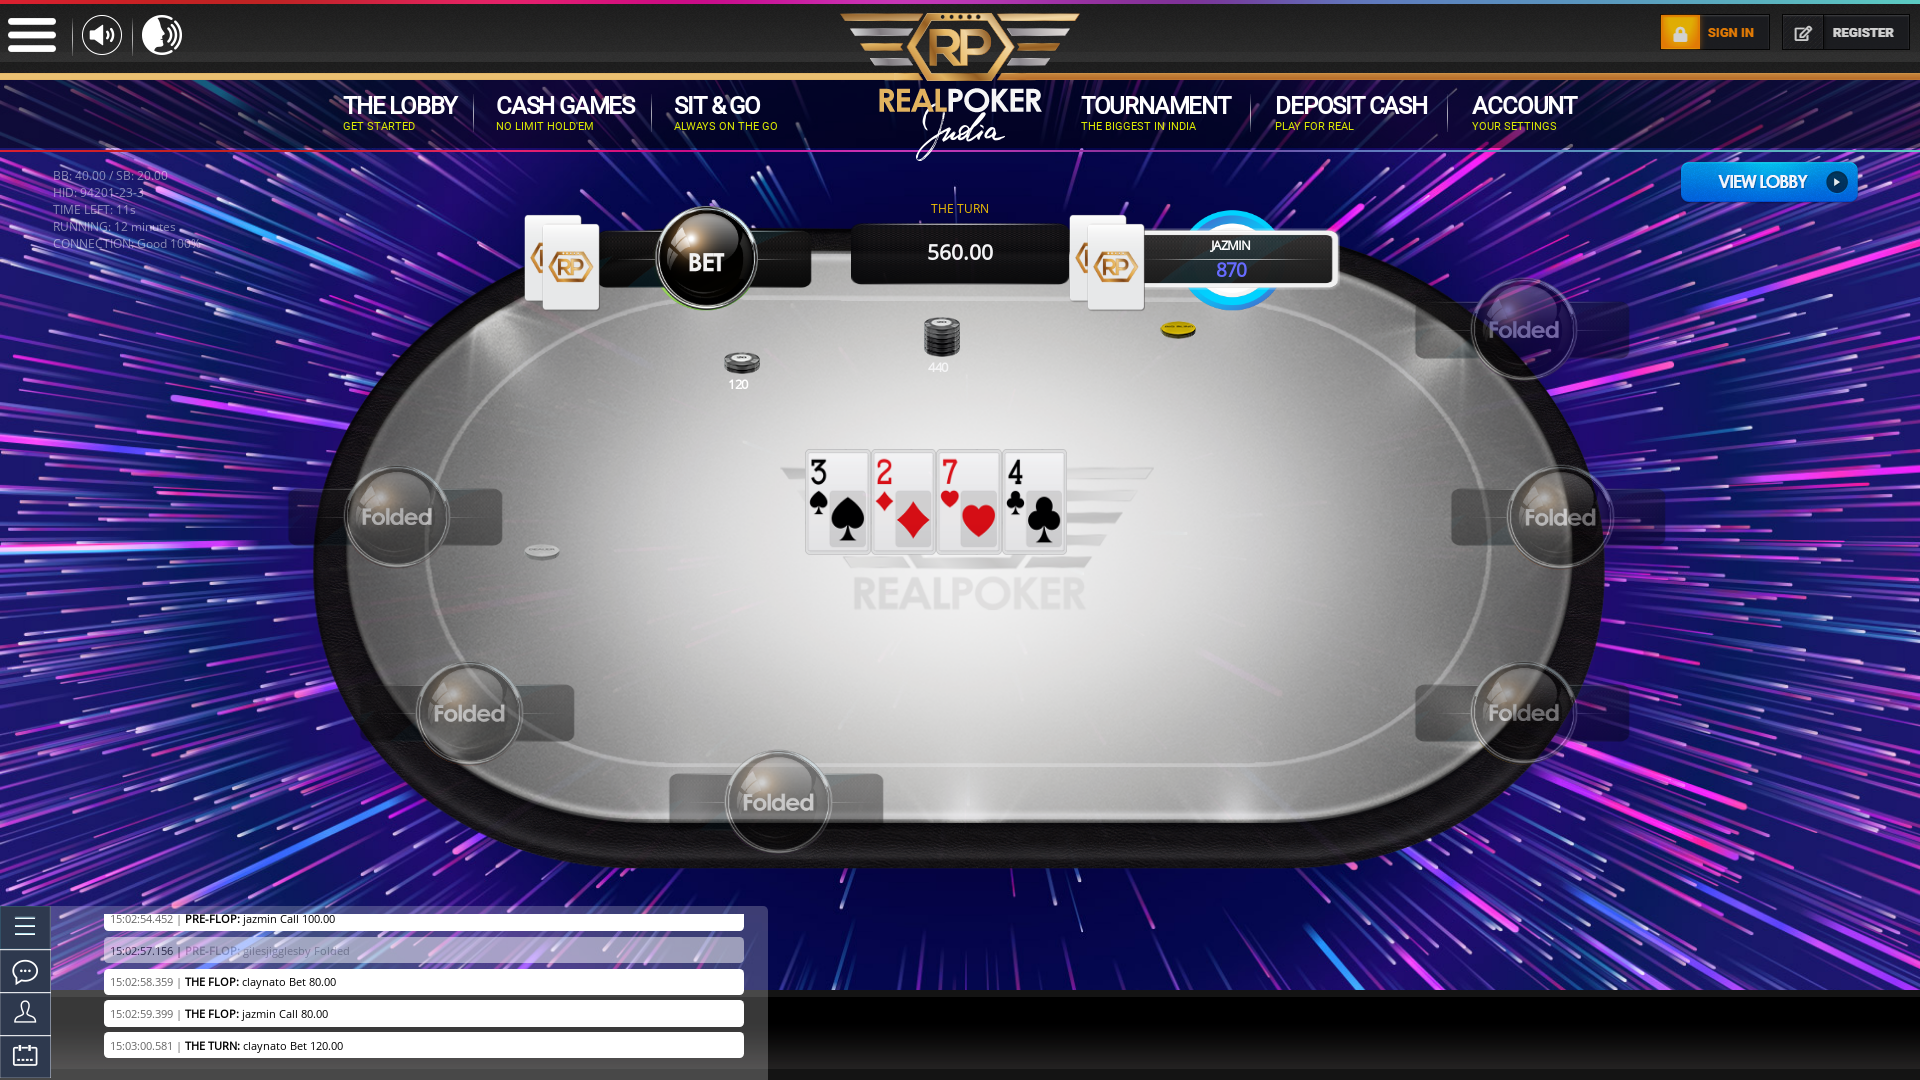 Real poker 10 player table in the 12th minute